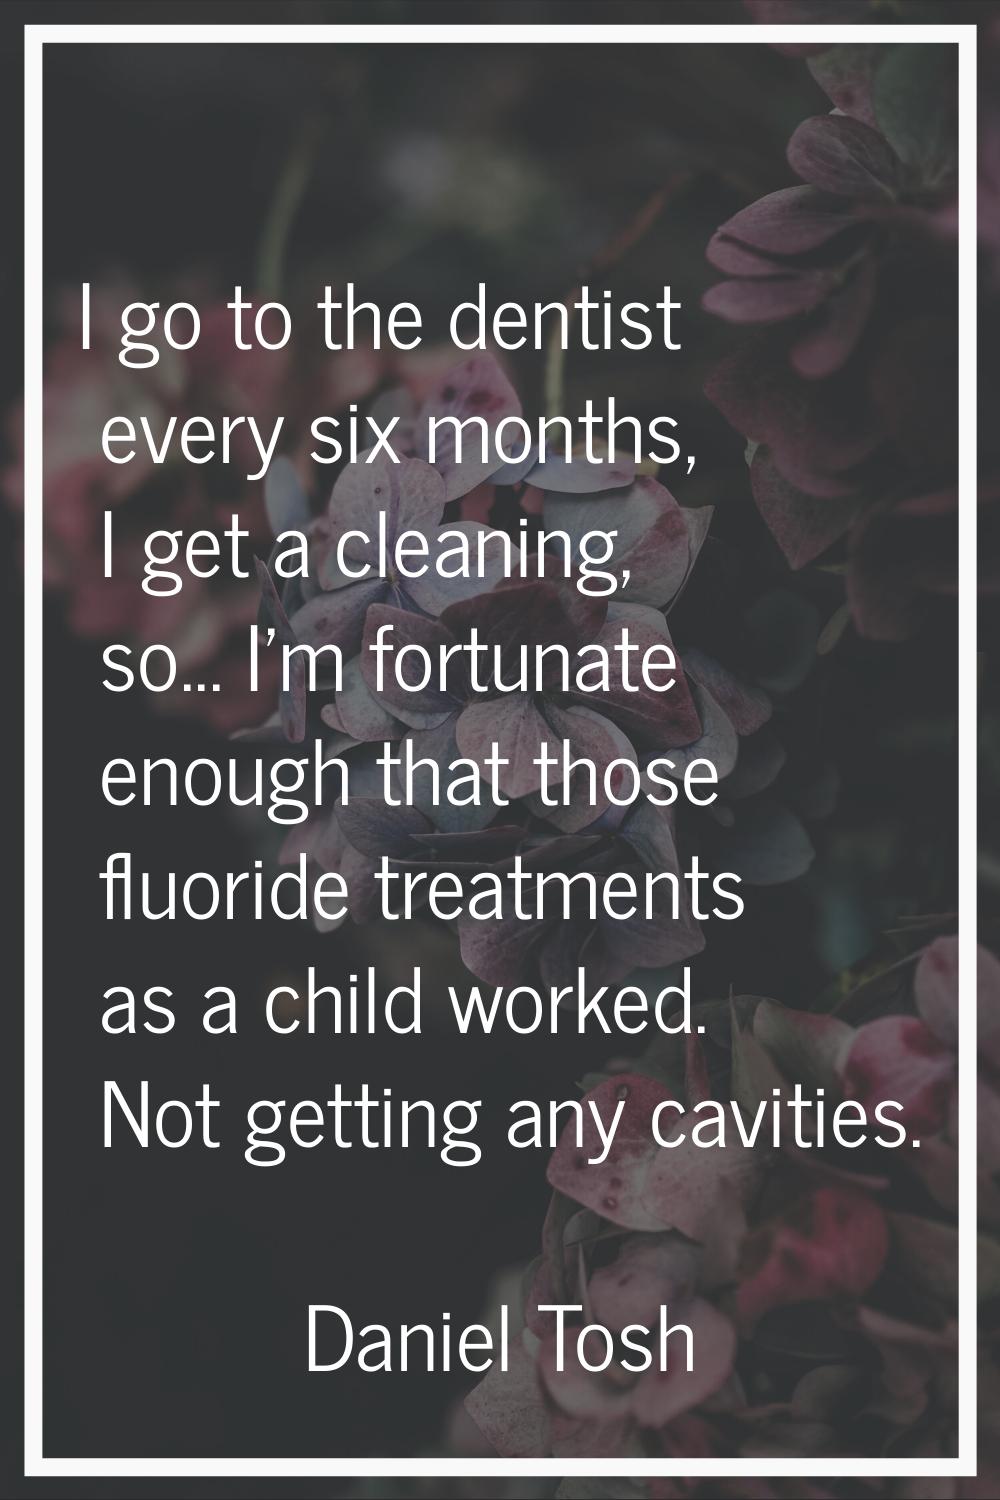 I go to the dentist every six months, I get a cleaning, so... I'm fortunate enough that those fluor